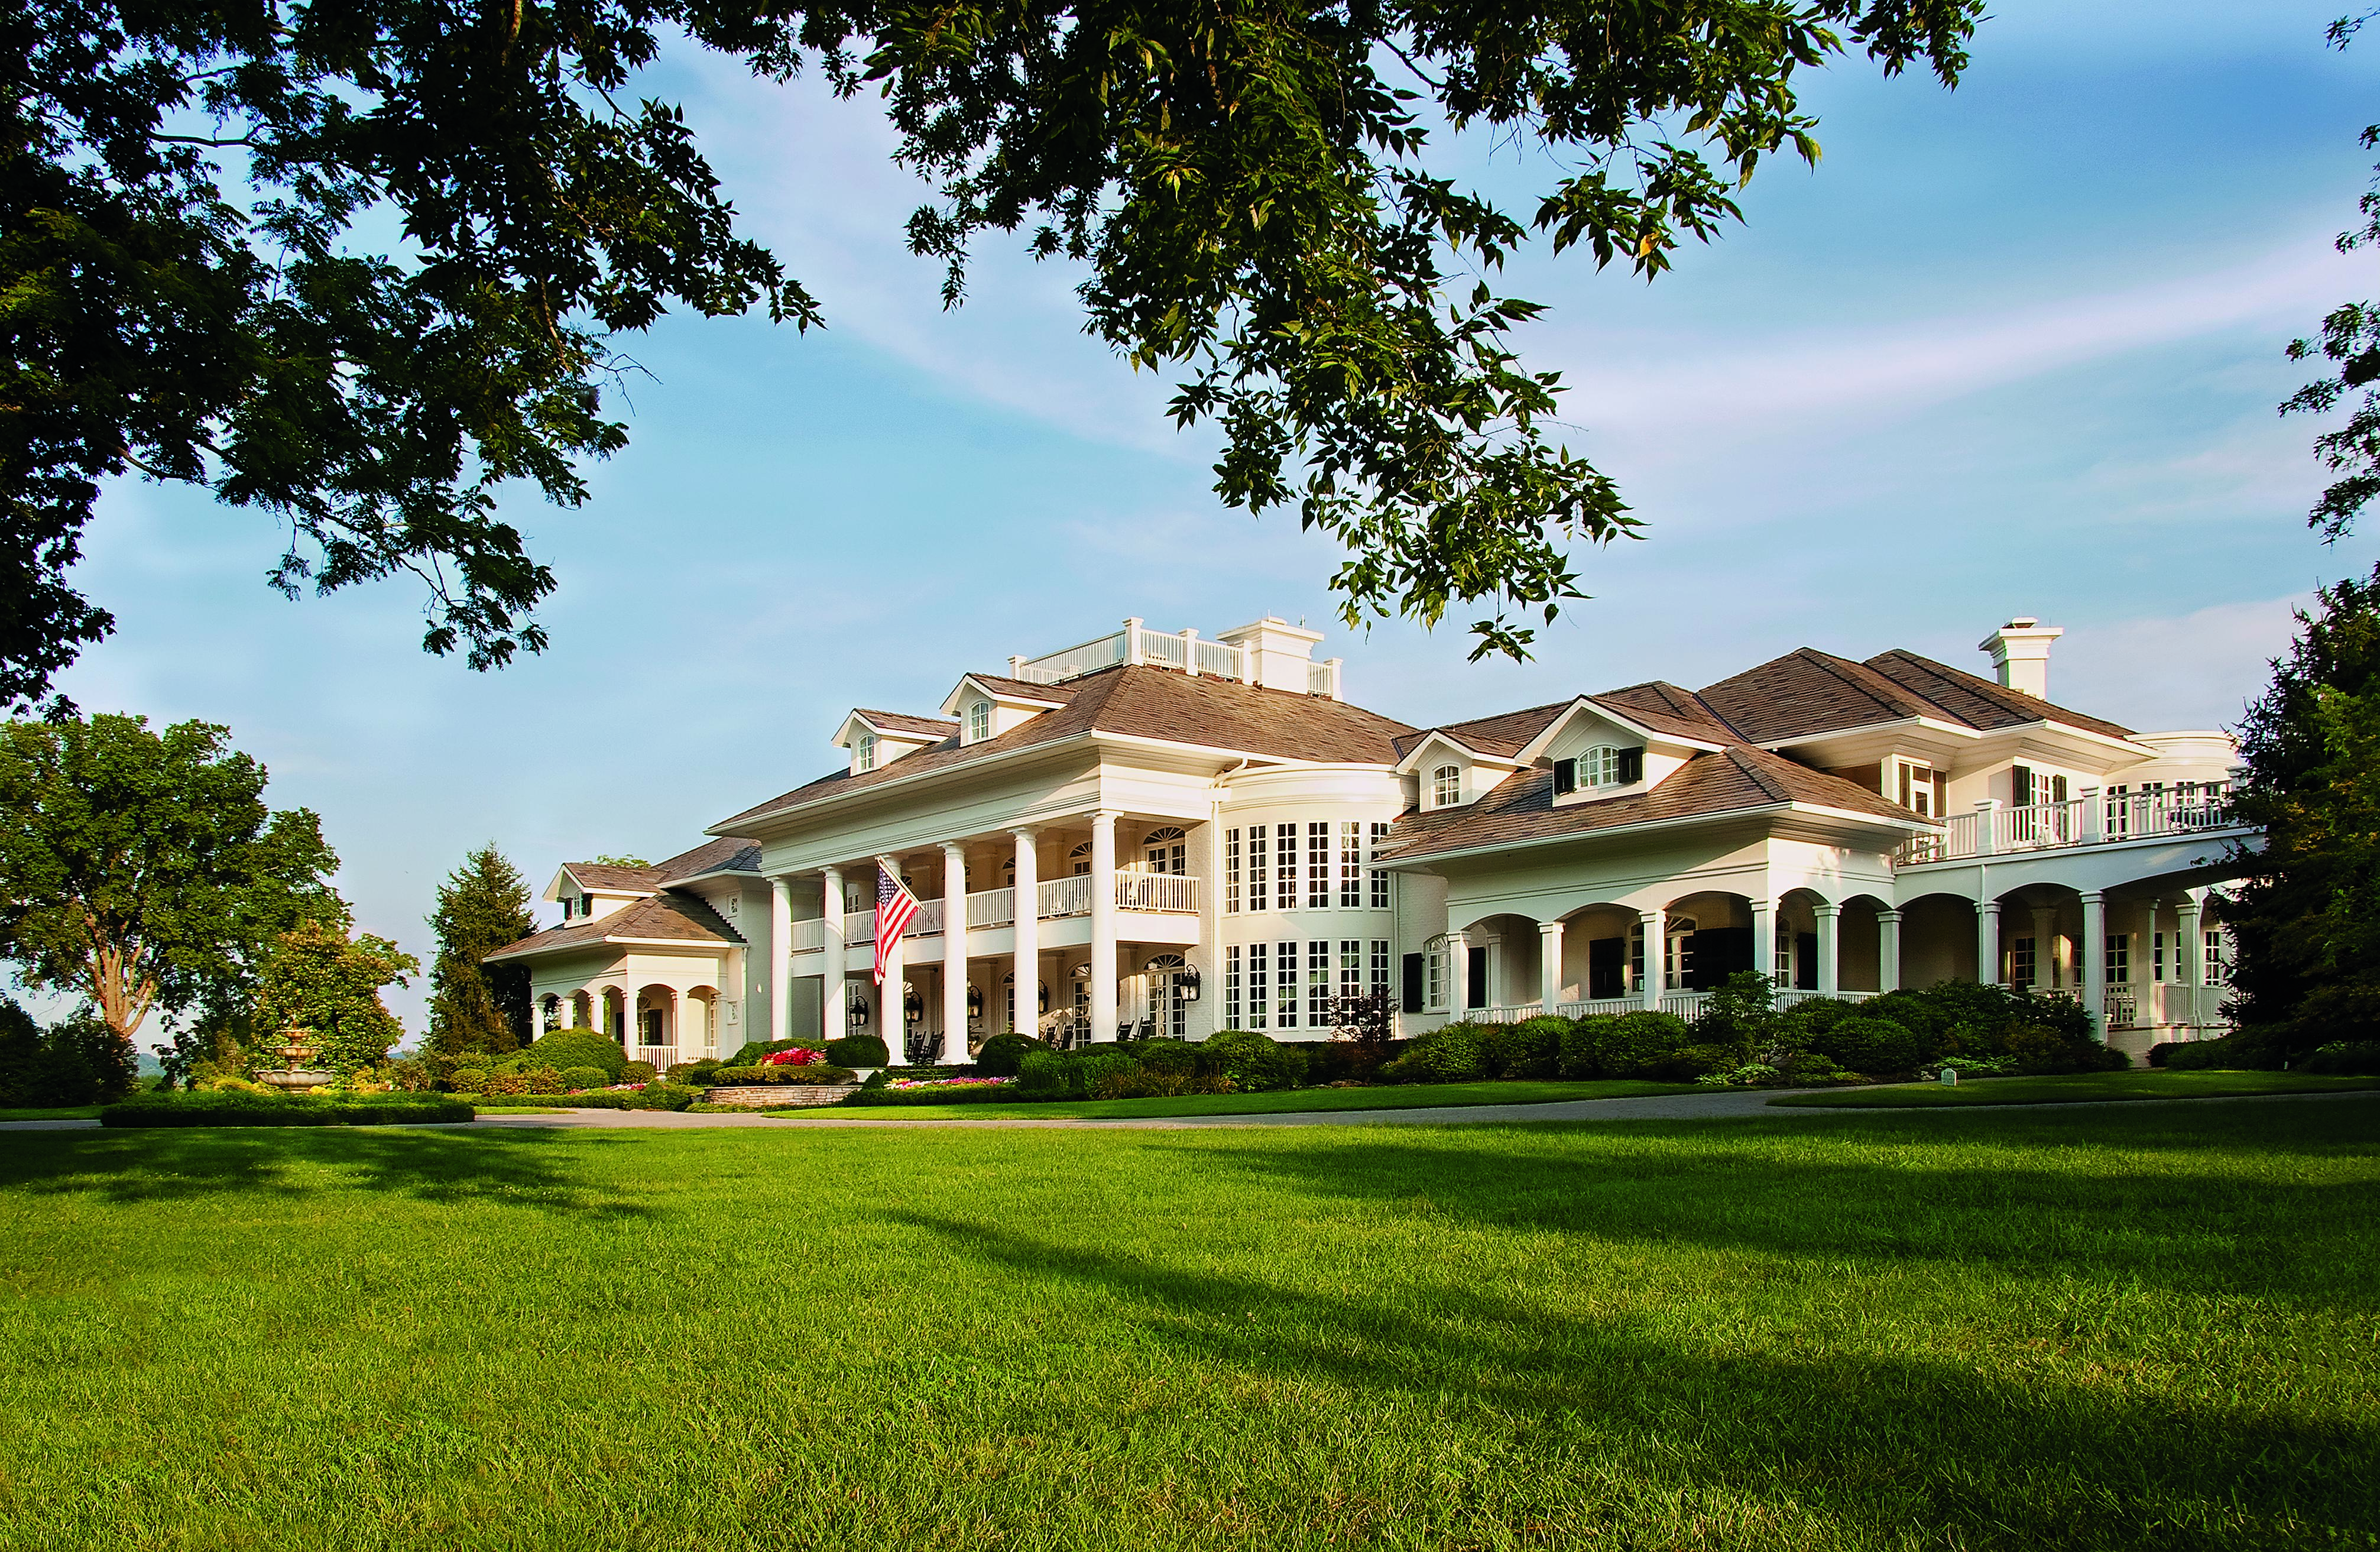 Significant Sale: Alan Jackson’s Sweetbriar Estate in Franklin, Tennessee